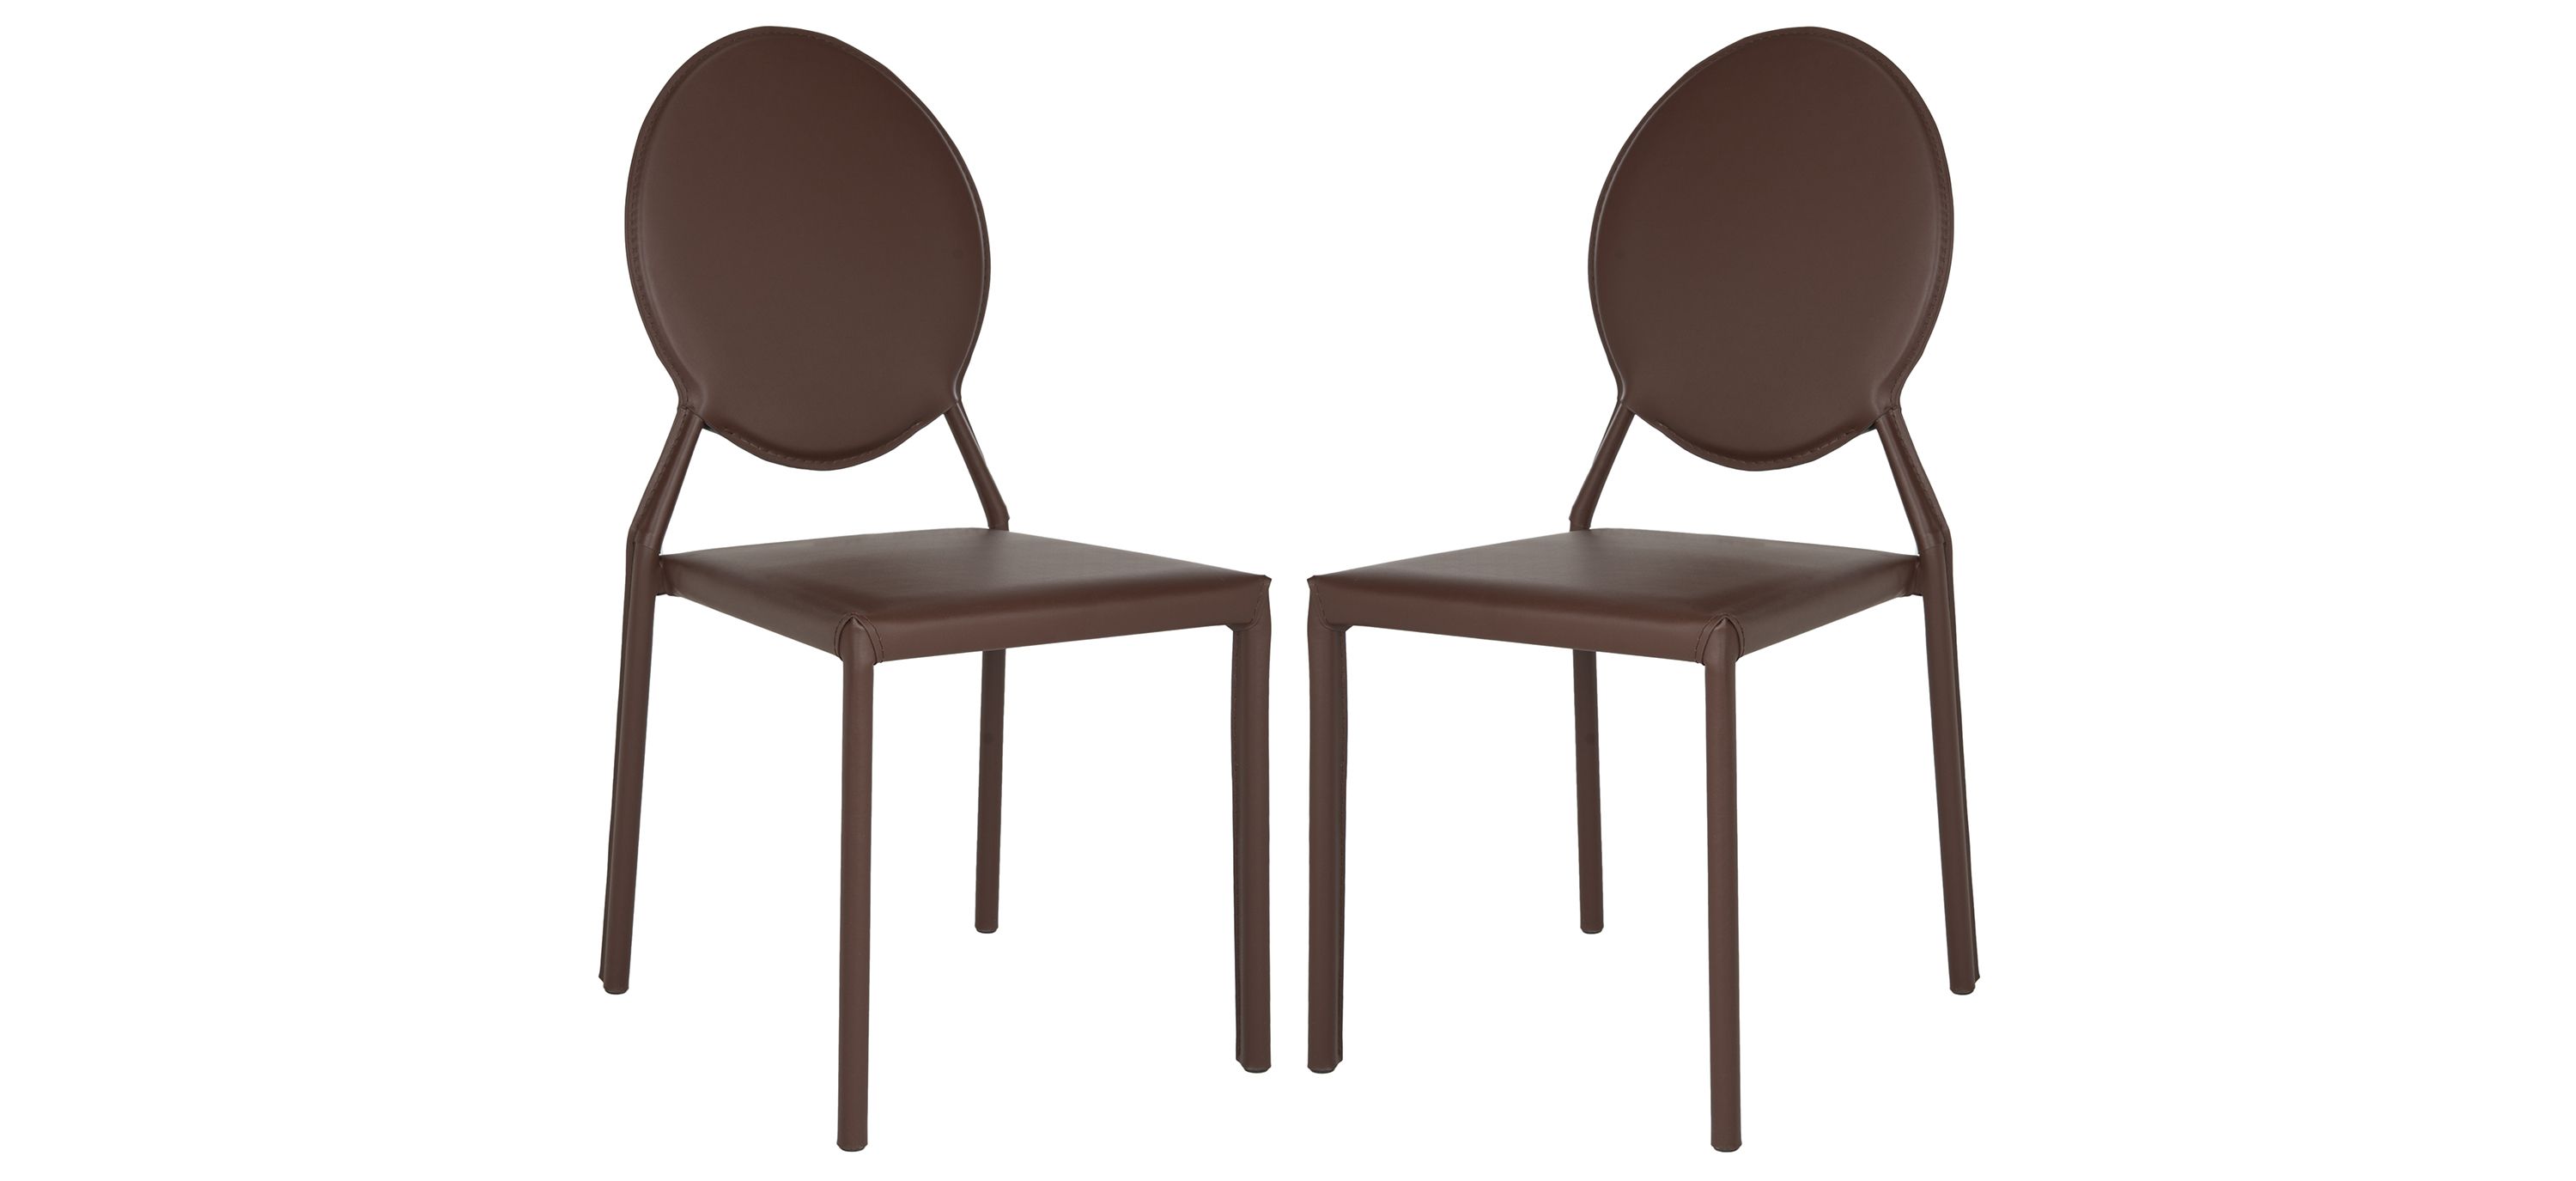 Gabs Round Back Dining Chair - Set of 2